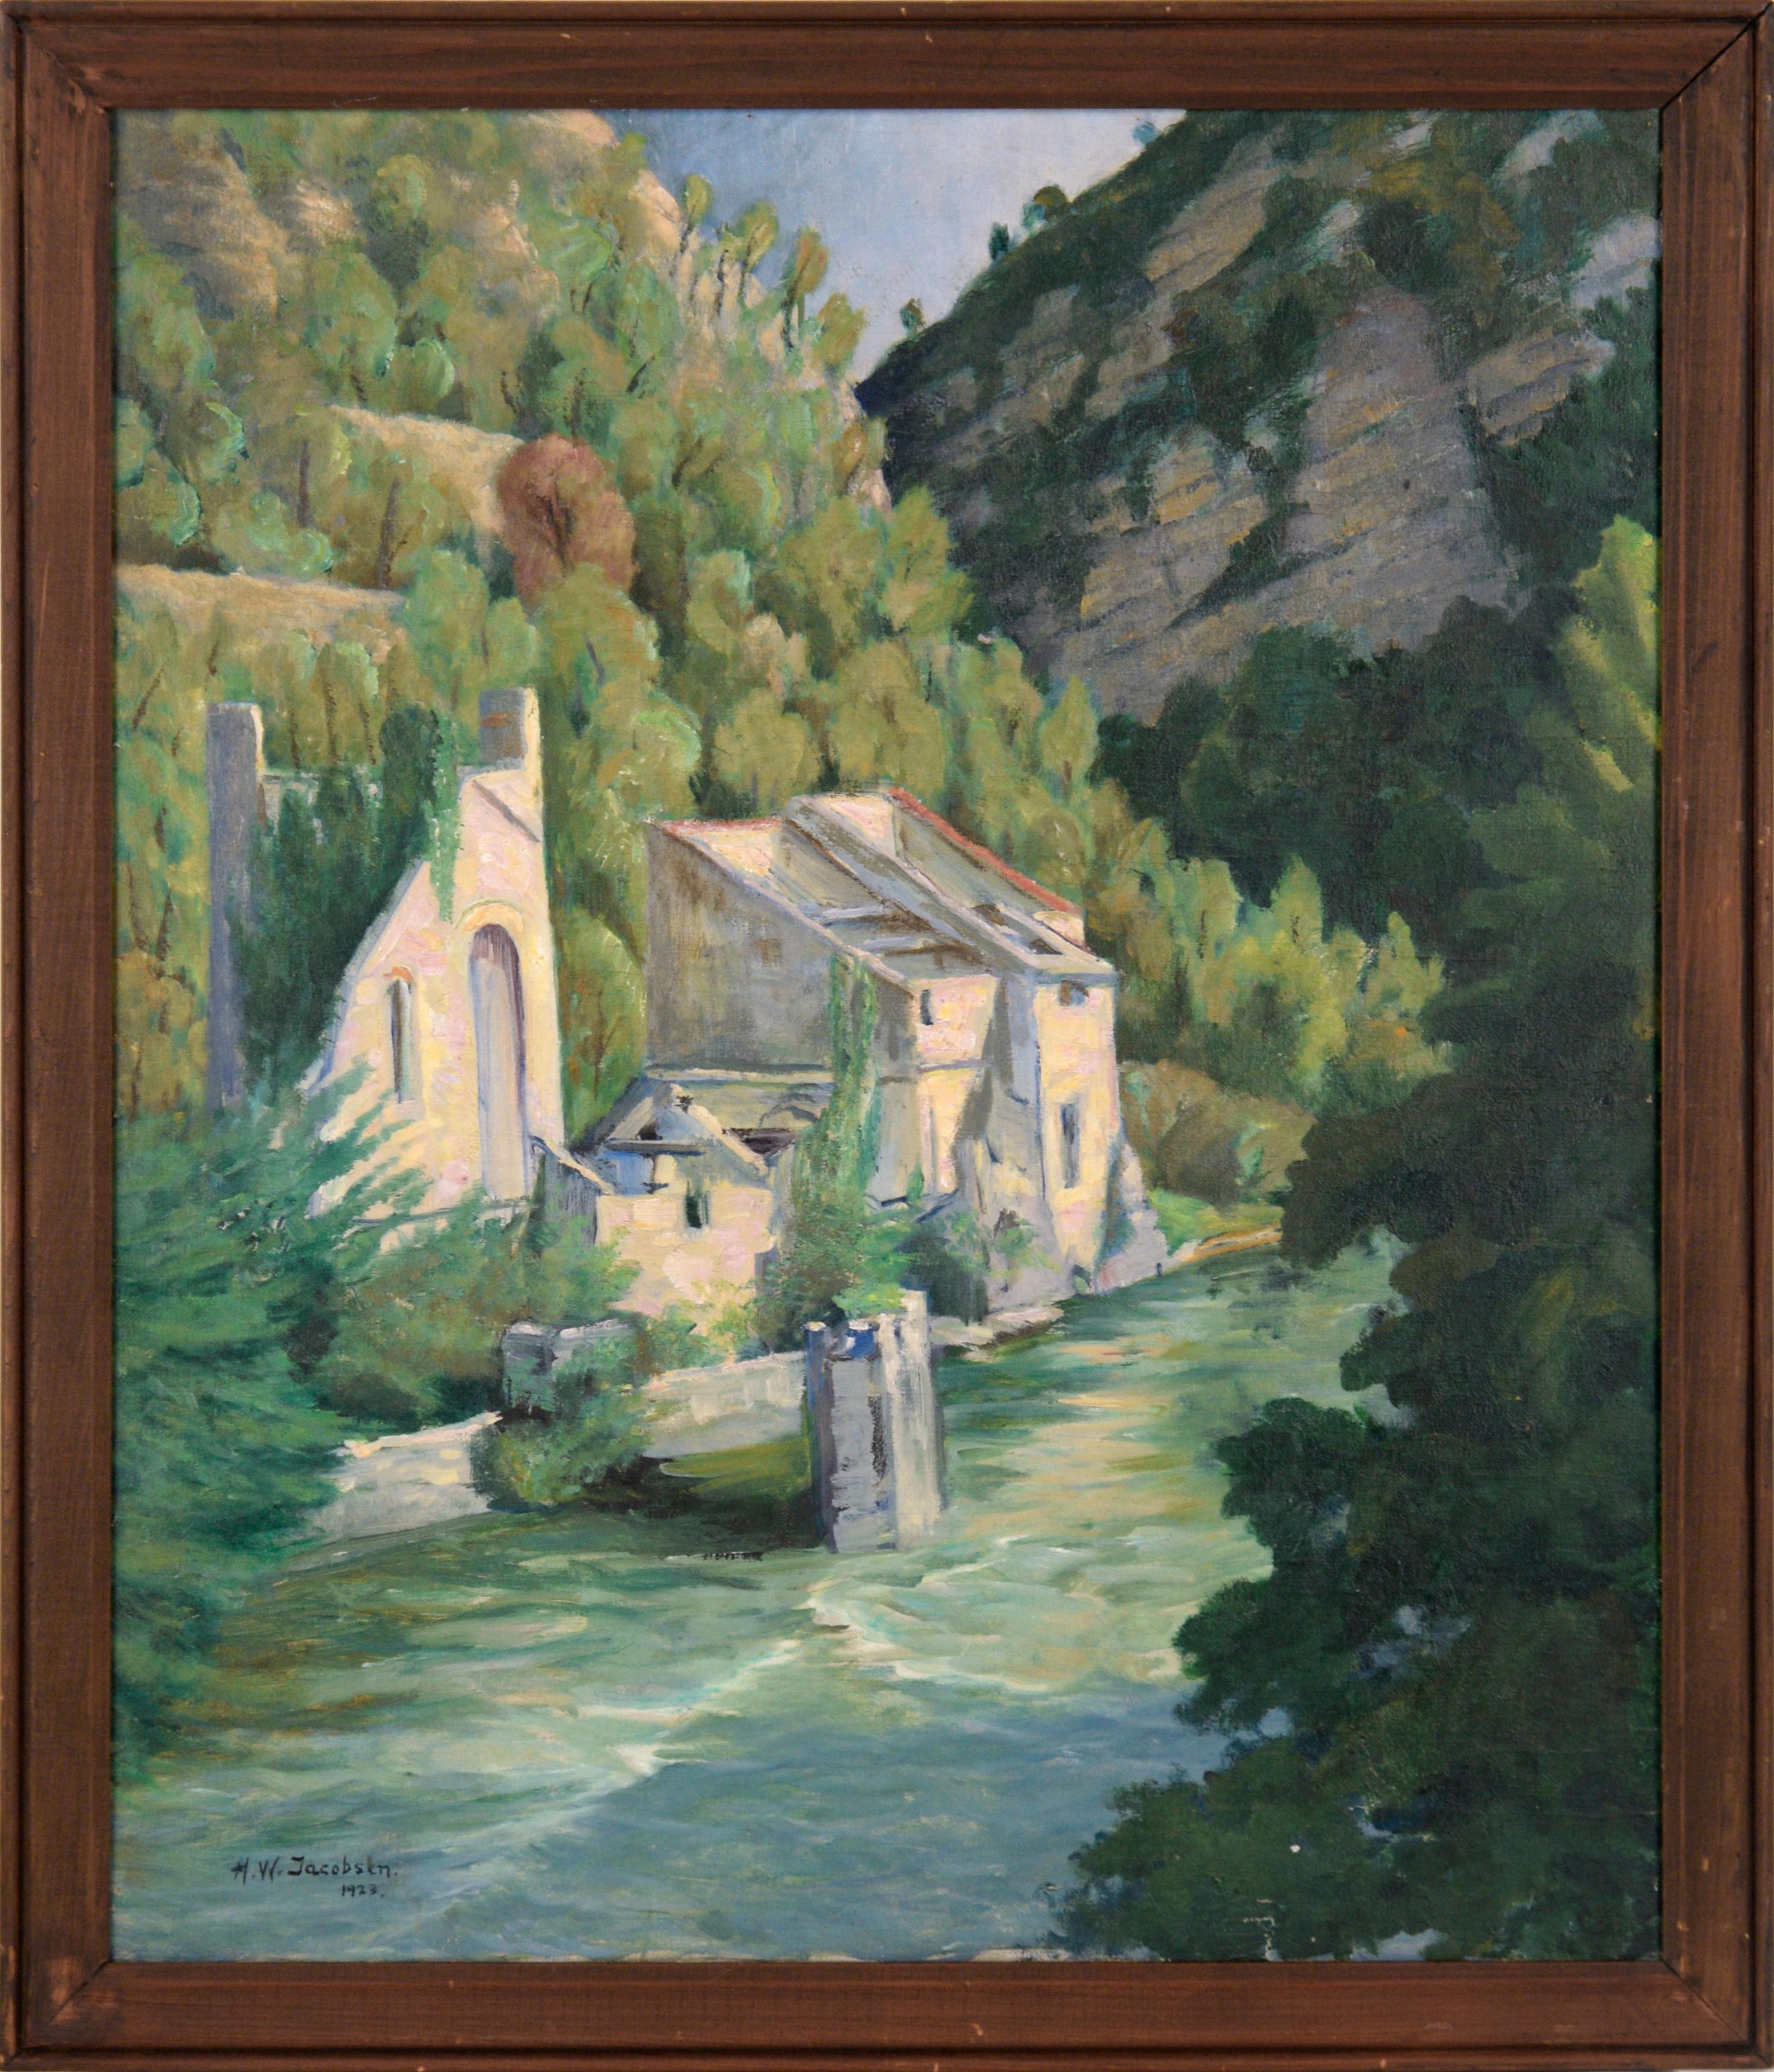 H. W. Jacobsen Landscape Painting - Monastery Ruins by the River - Landscape